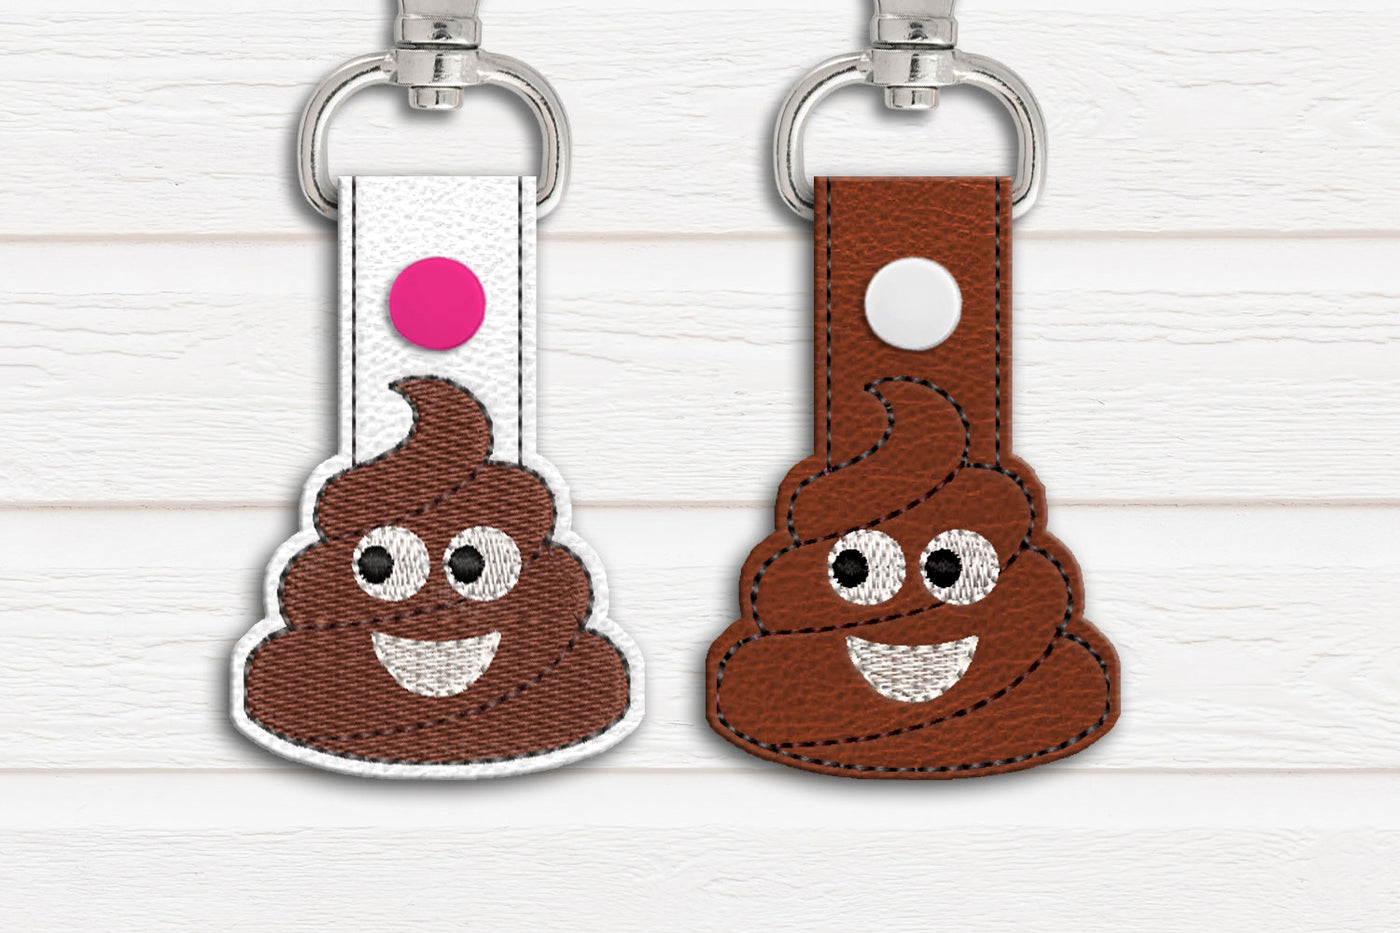 Poop Key Fob ITH embroidery 